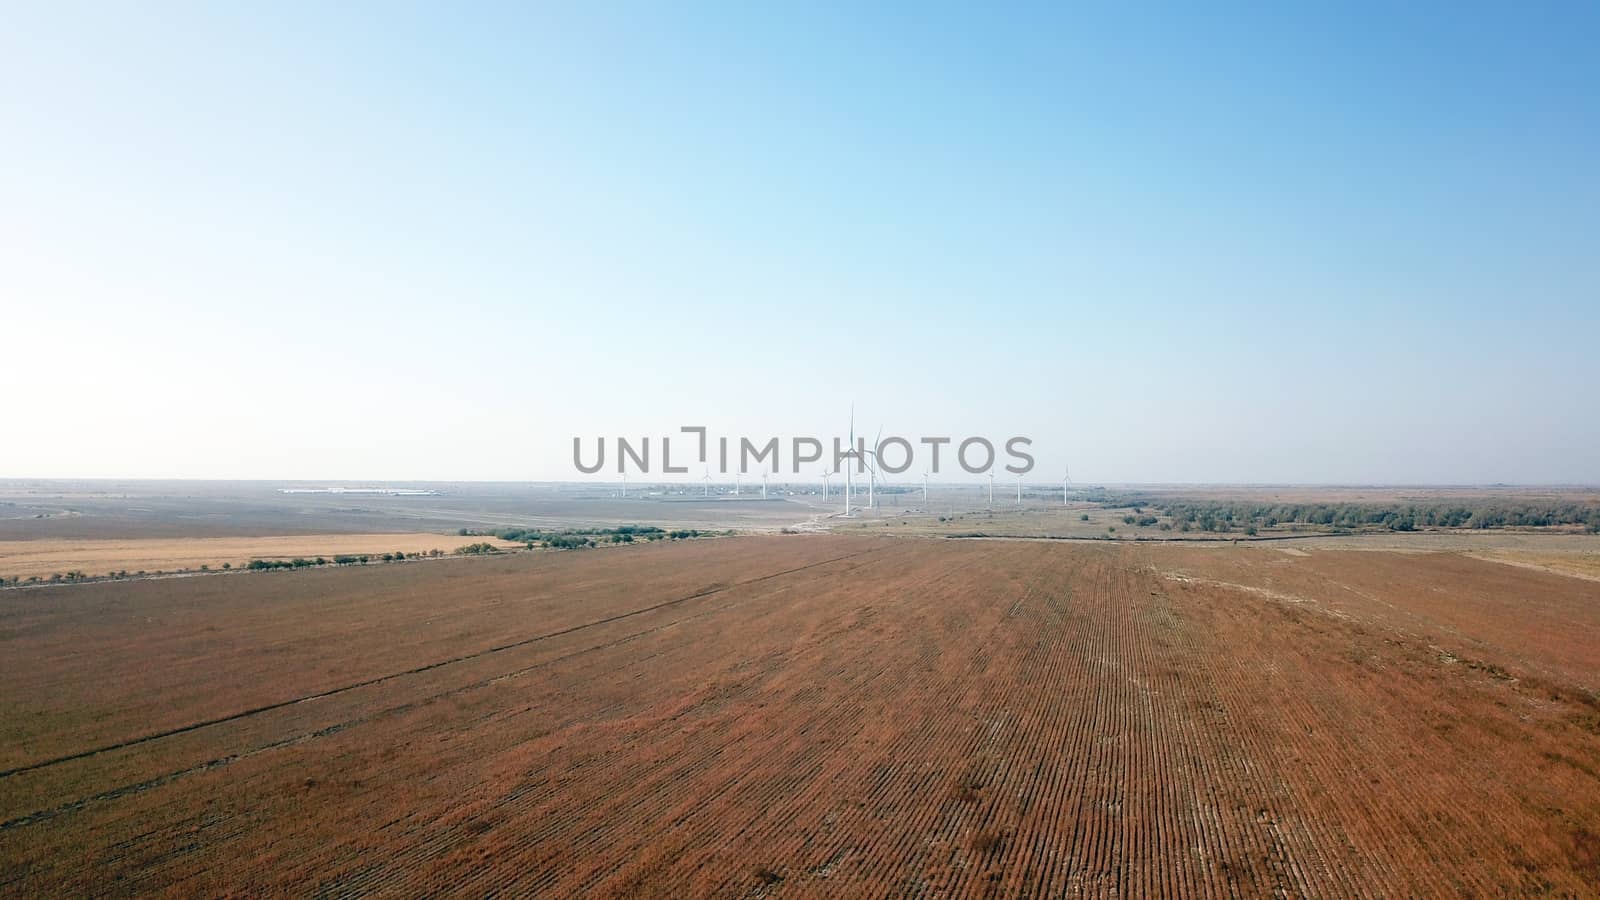 Windmills near the field. Top view from a drone. Blue sky, light shroud, windmills turn, green energy is generated. Alternative energy, clean land. Yellow plants, and a desert. Industrial farm.